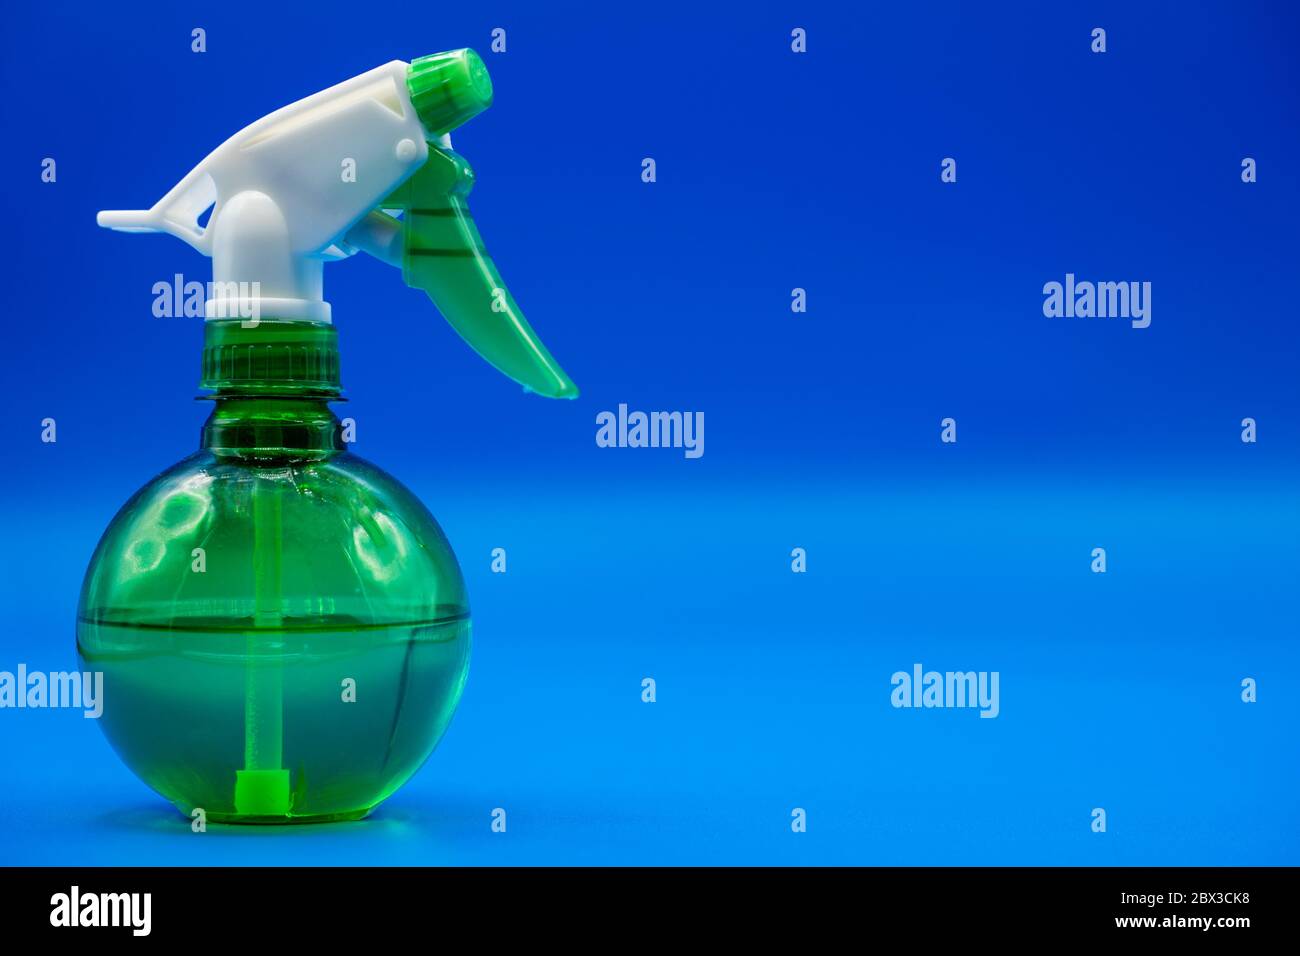 Plastic spray bottle with copy space. Liquid sprayer isolated in a colorful blue background. Stock Photo